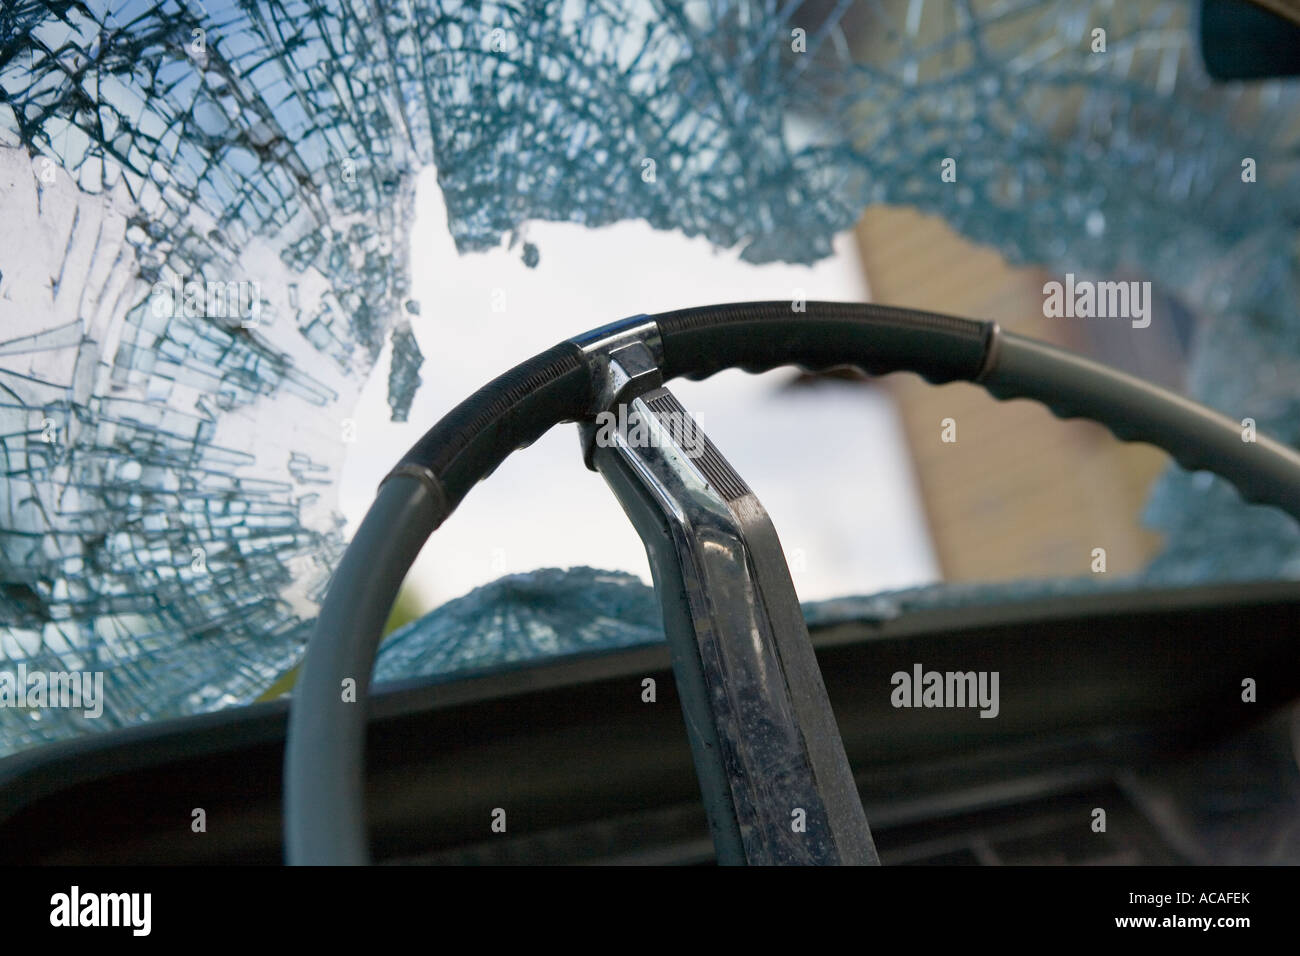 Aftermath of an automobile accident fatality shattered glass windshield Stock Photo